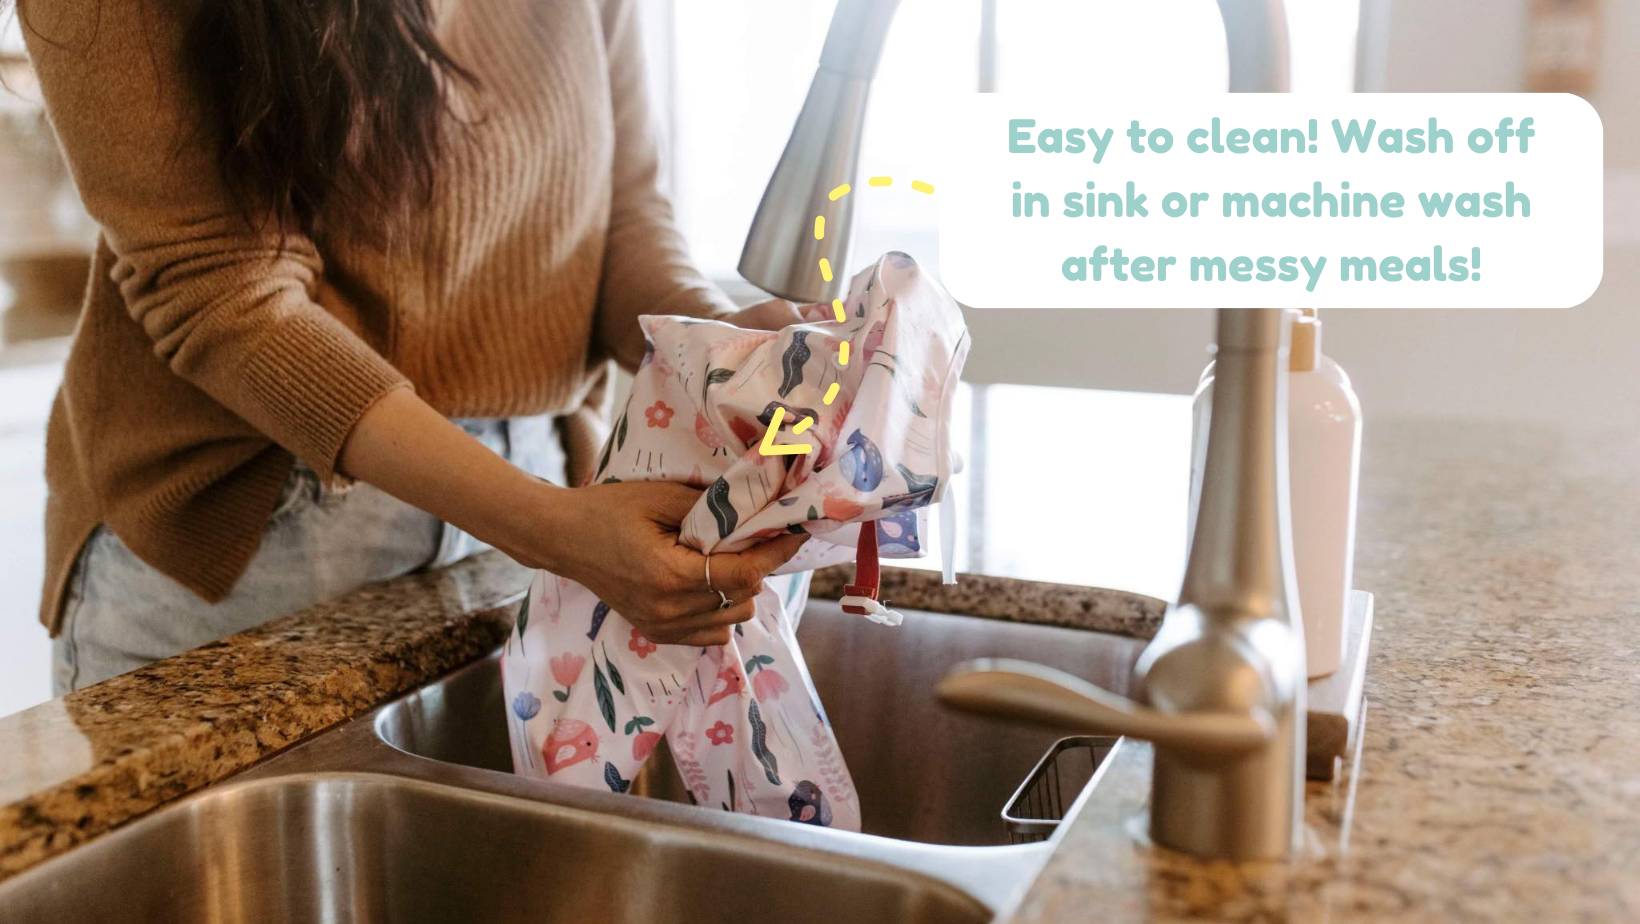 Hands washing a 'Little Birdie' print Bibvy bib in the sink, with a caption highlighting the ease of cleaning by rinsing or machine washing after meals.